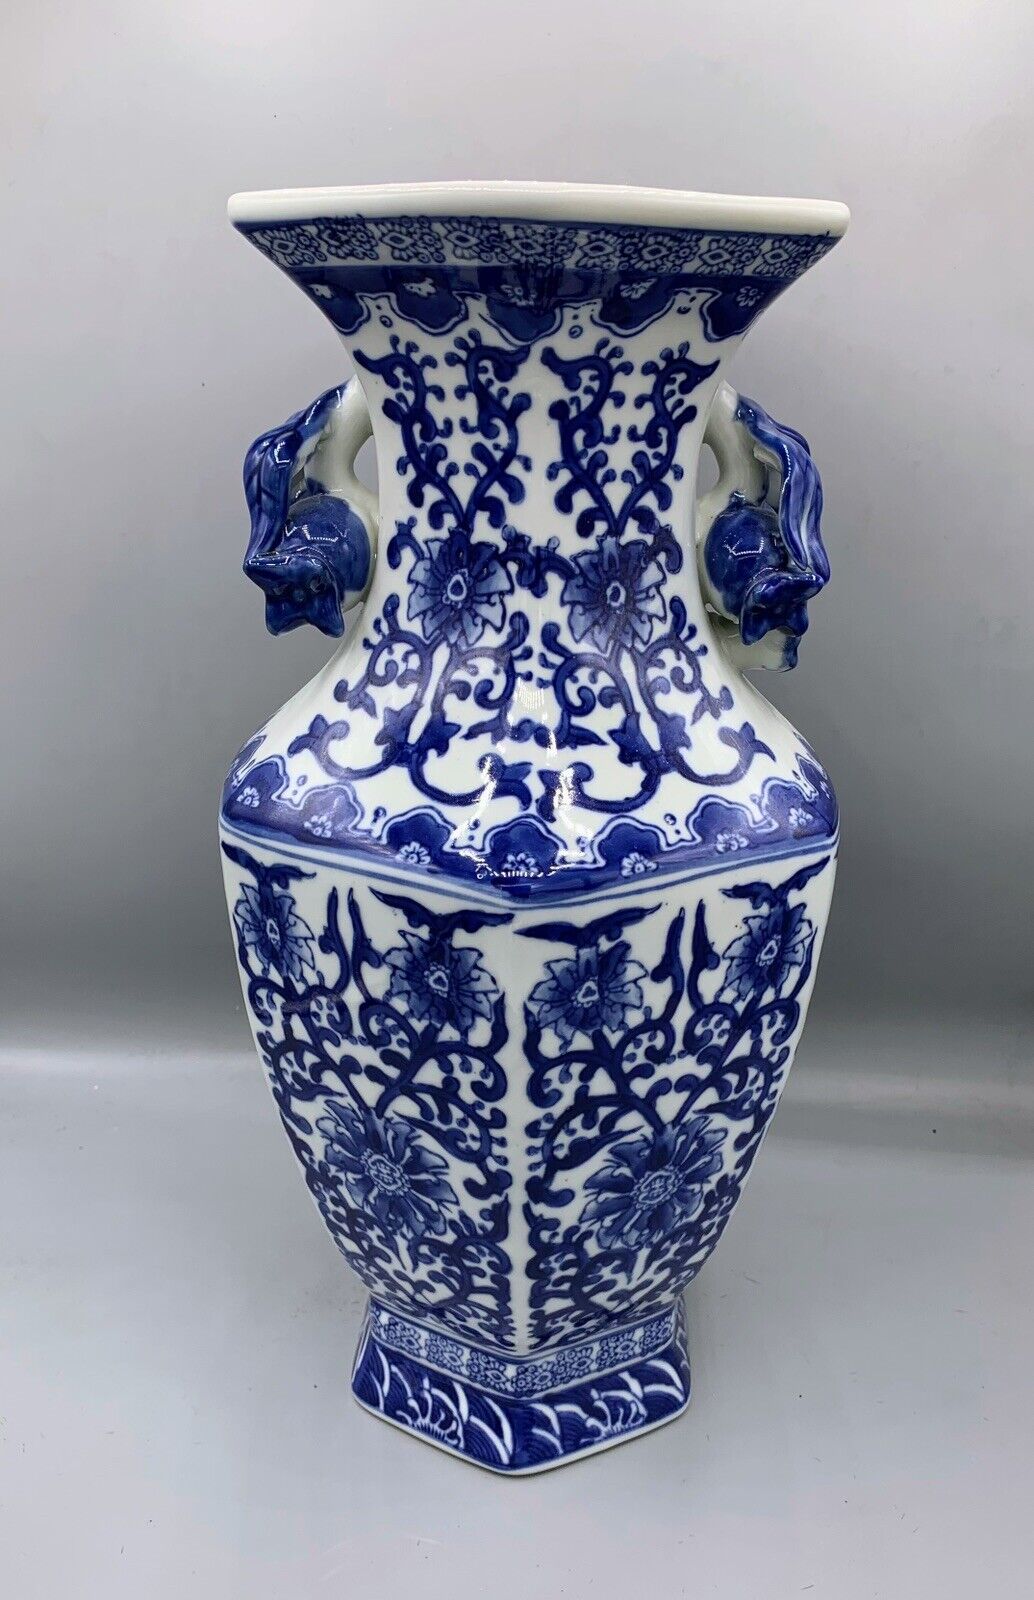 Vintage Chinese Blue And White Porcelain Vase Pot Pitcher Detailed Intricate Art